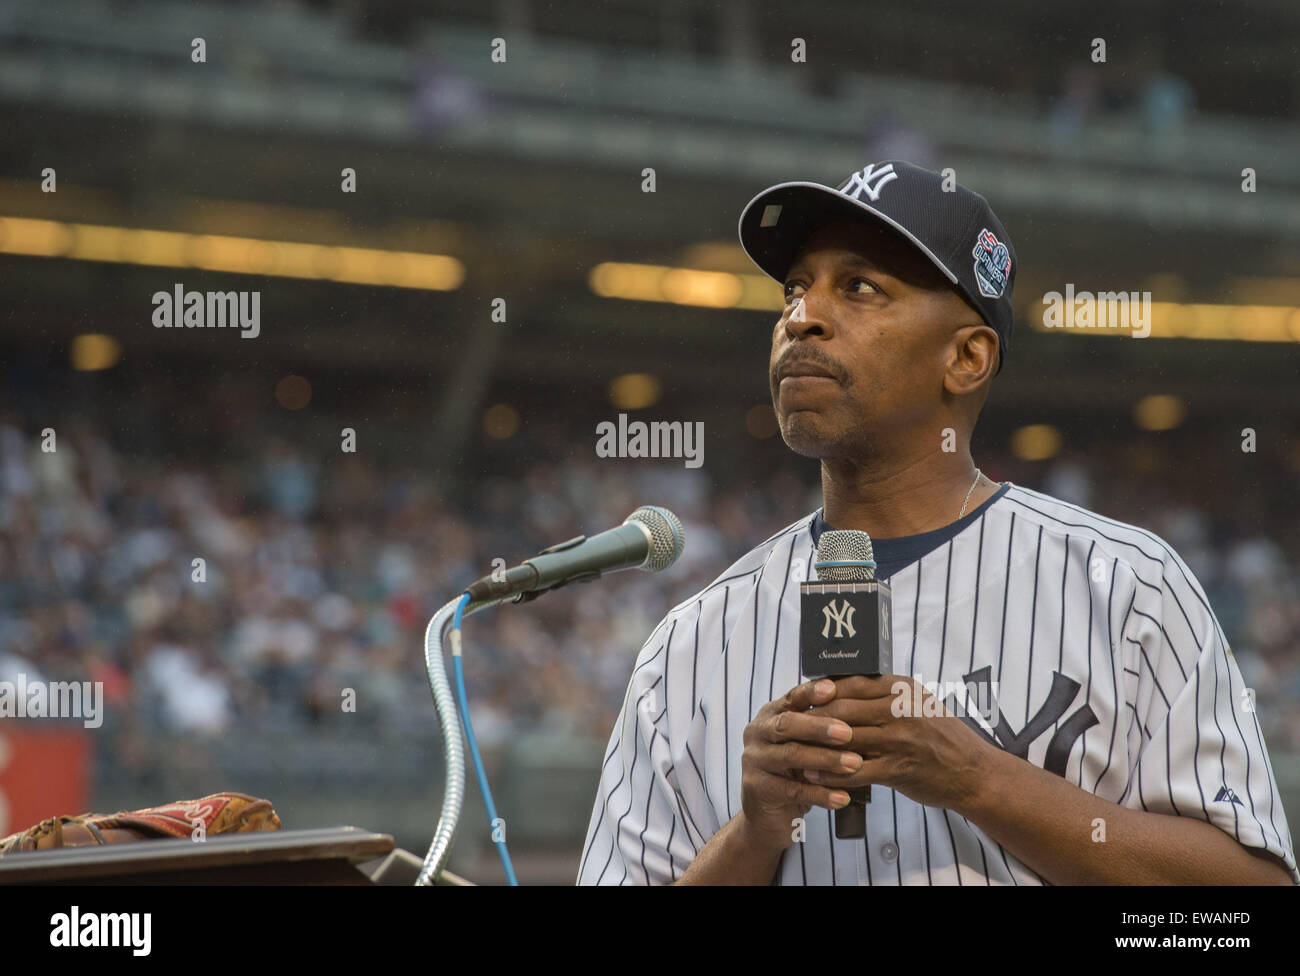 Bronx, NY, USA. 20th June, 2015. WILLIE RANDOLPH is honored with a Monument Park plaque as part of 2015 Old-Timers' Day, Yankee Stadium, Saturday June 20, 2015. Credit:  Bryan Smith/ZUMA Wire/Alamy Live News Stock Photo